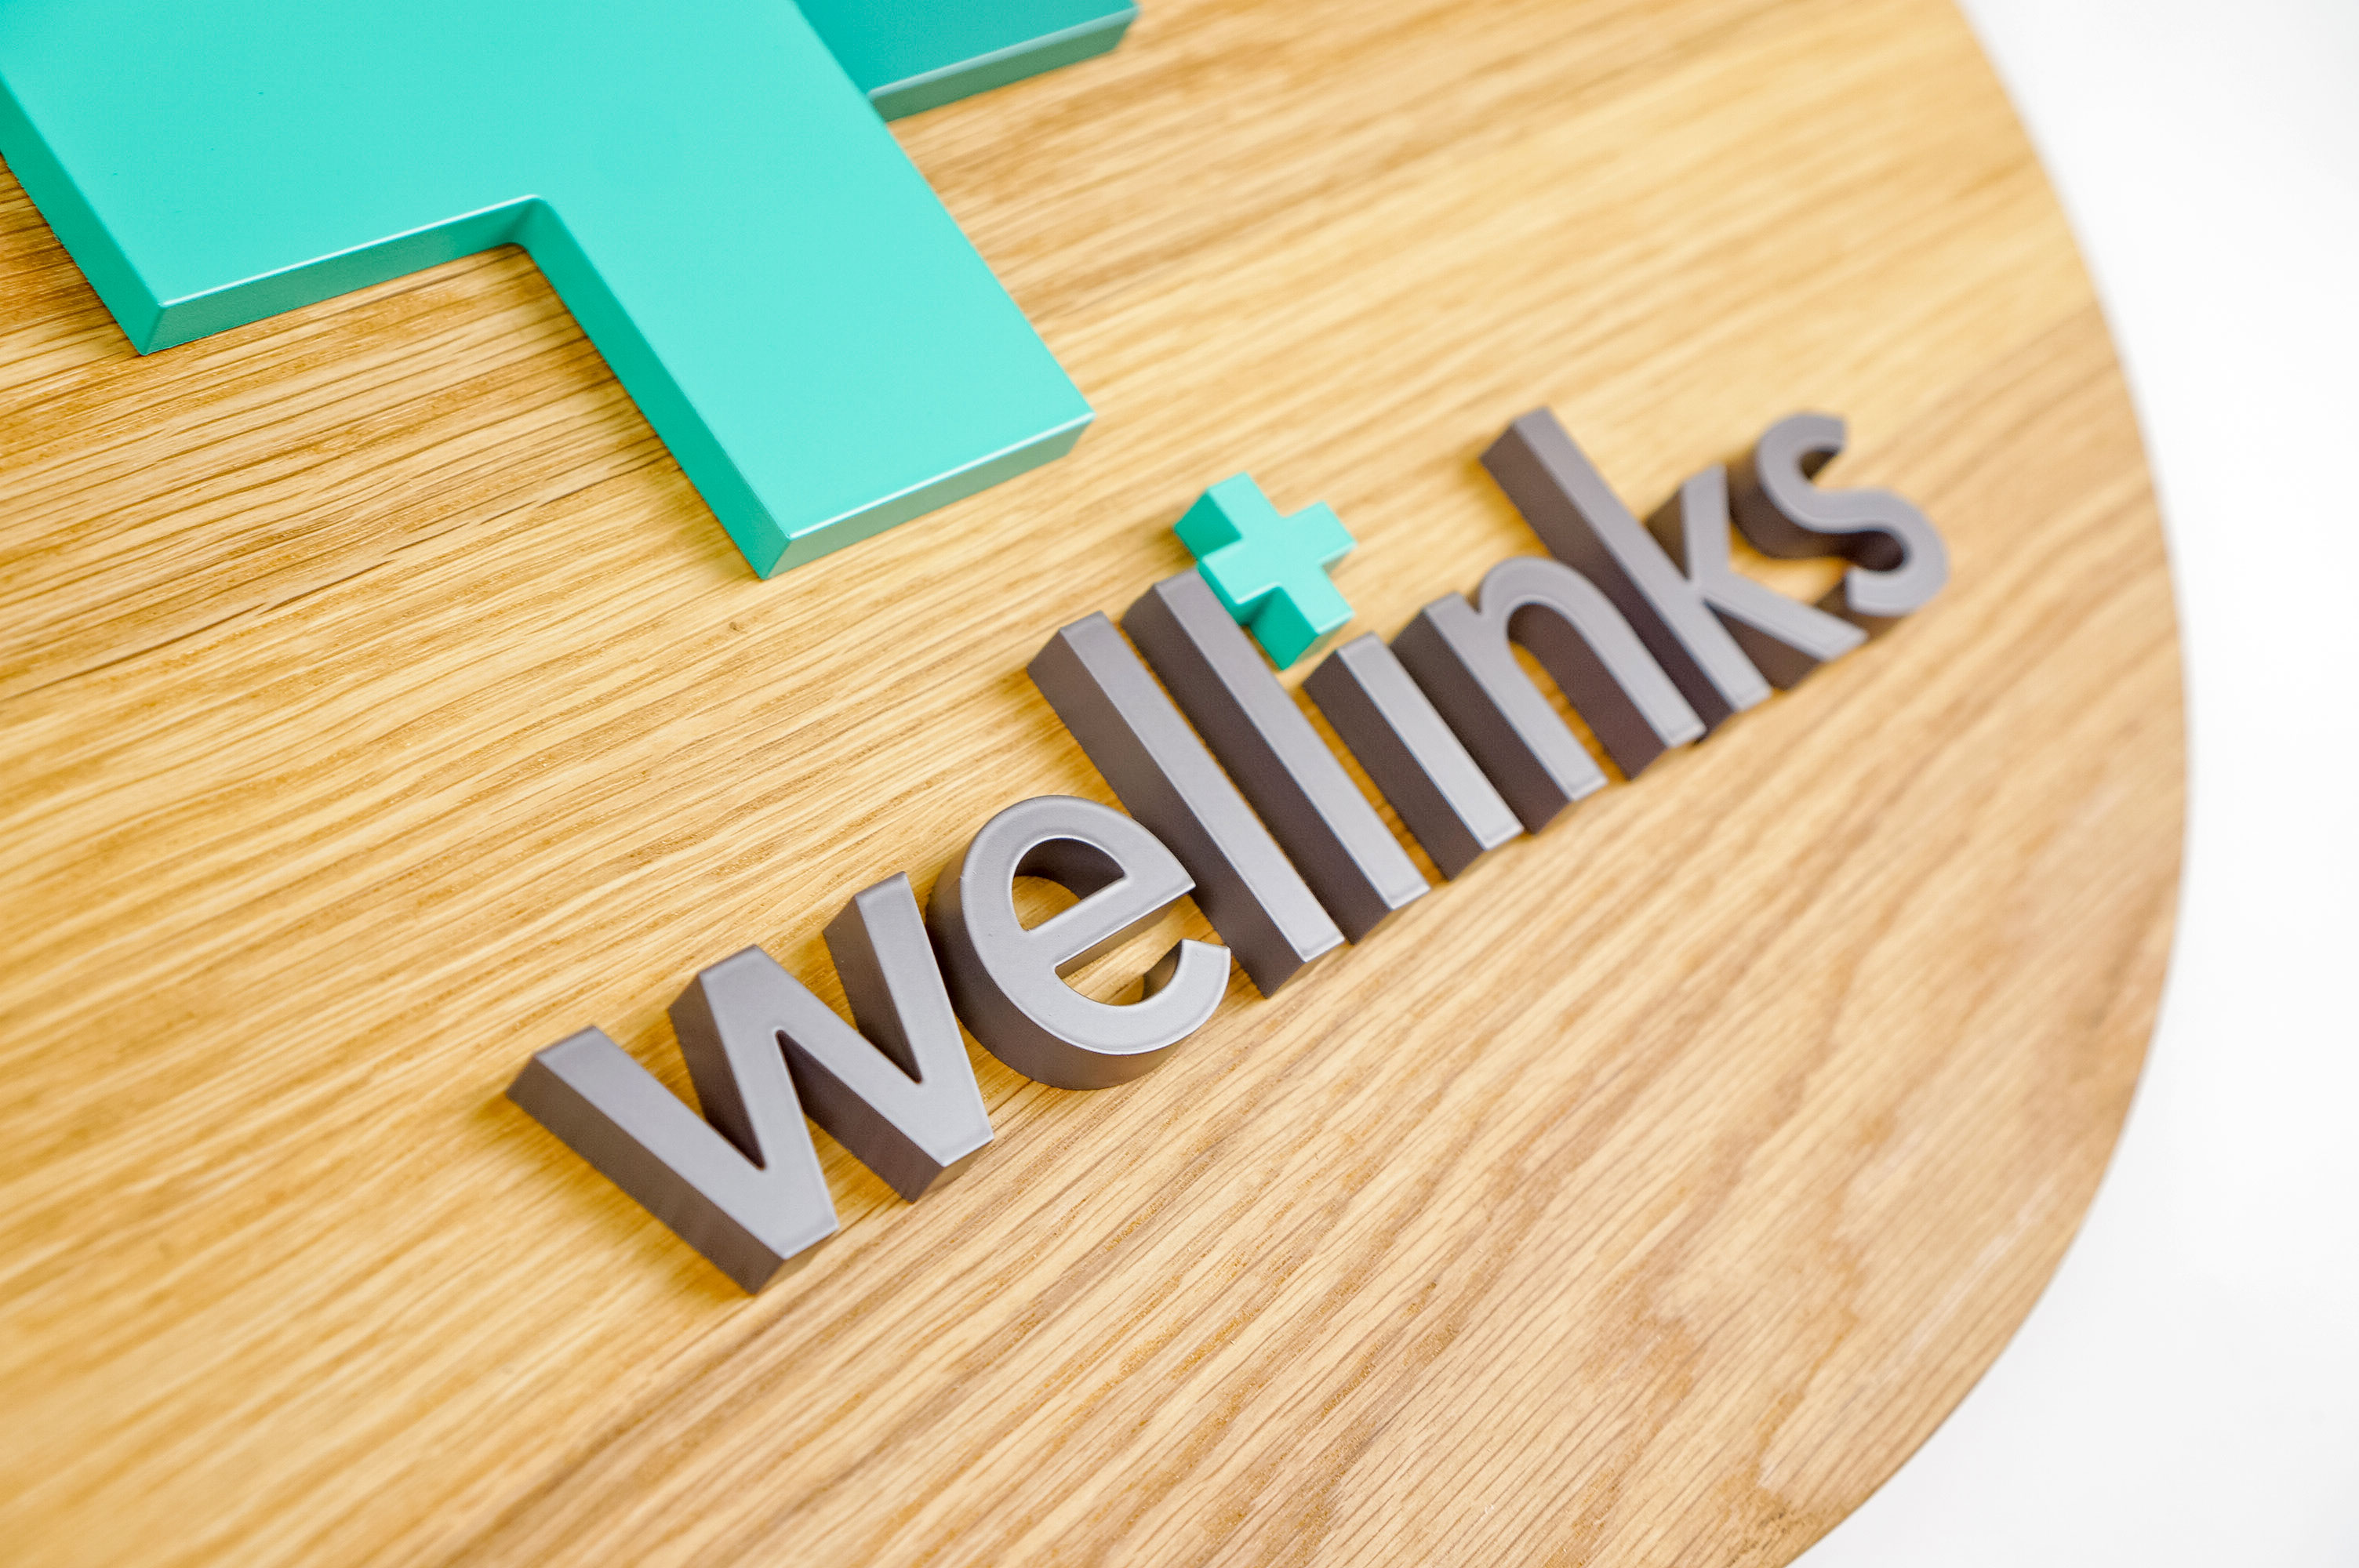 Wood hanging blade sign with green and grey logo for Wellinks, a wearable health technology company.